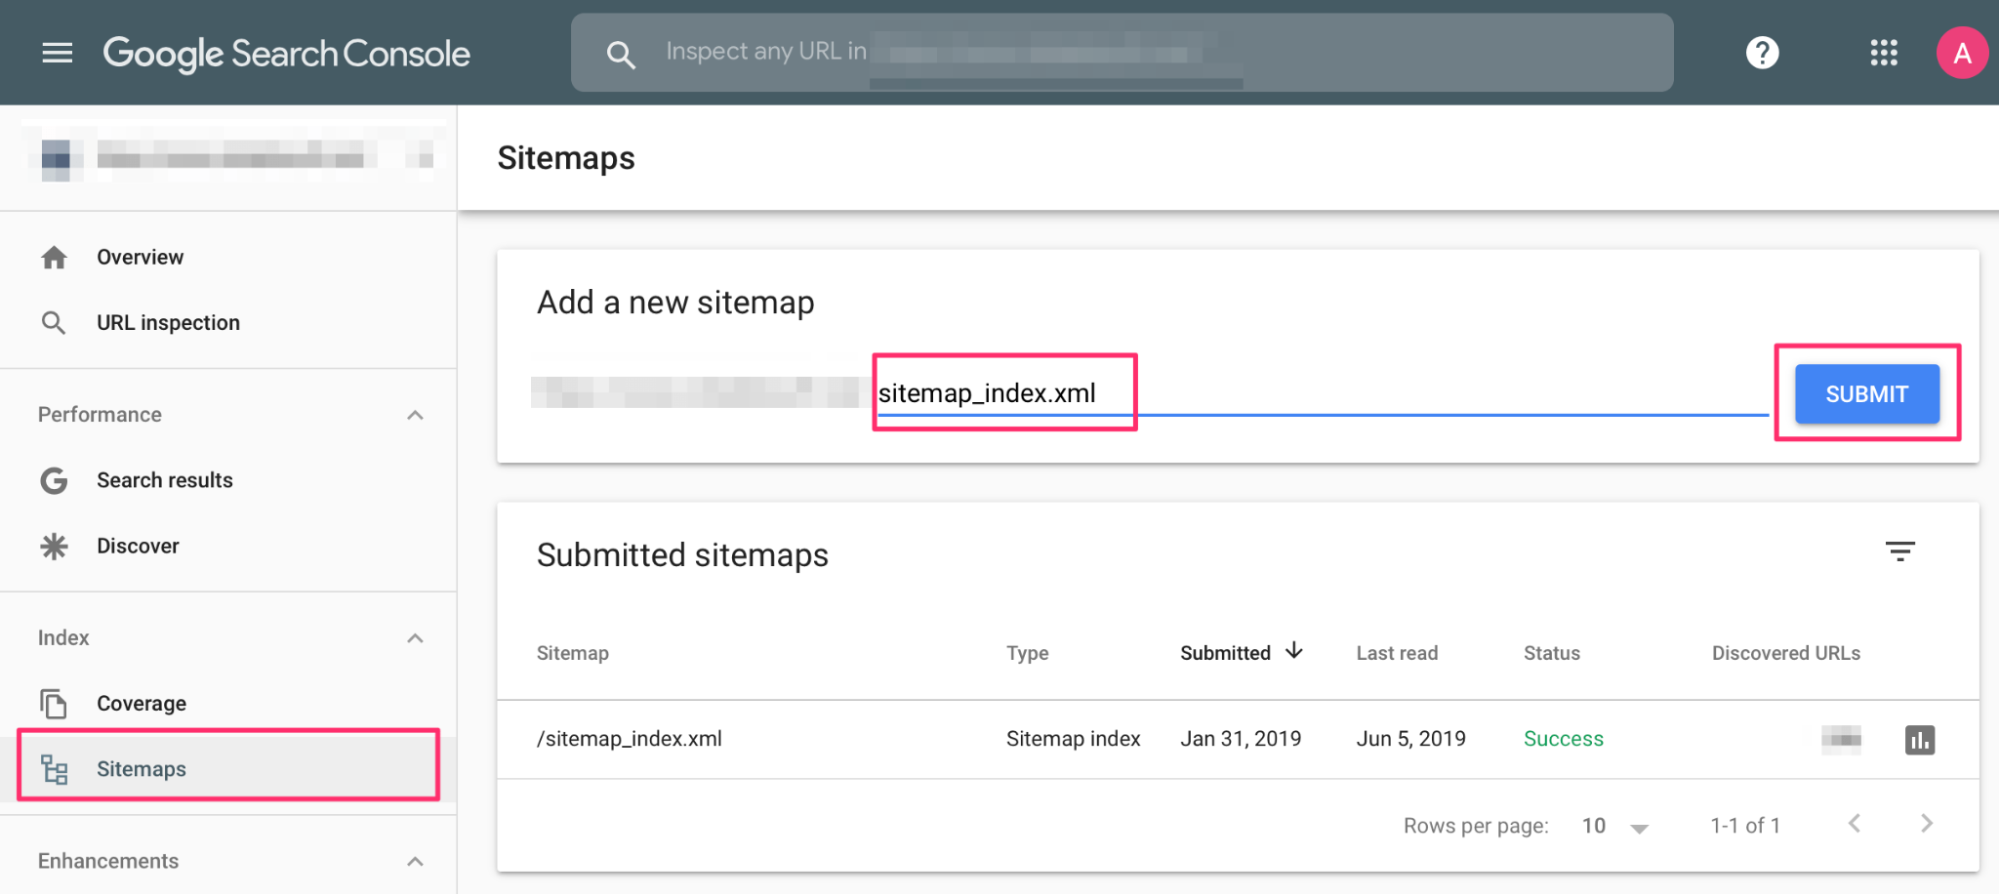 Creating A Sitemap And Submitting It To Google